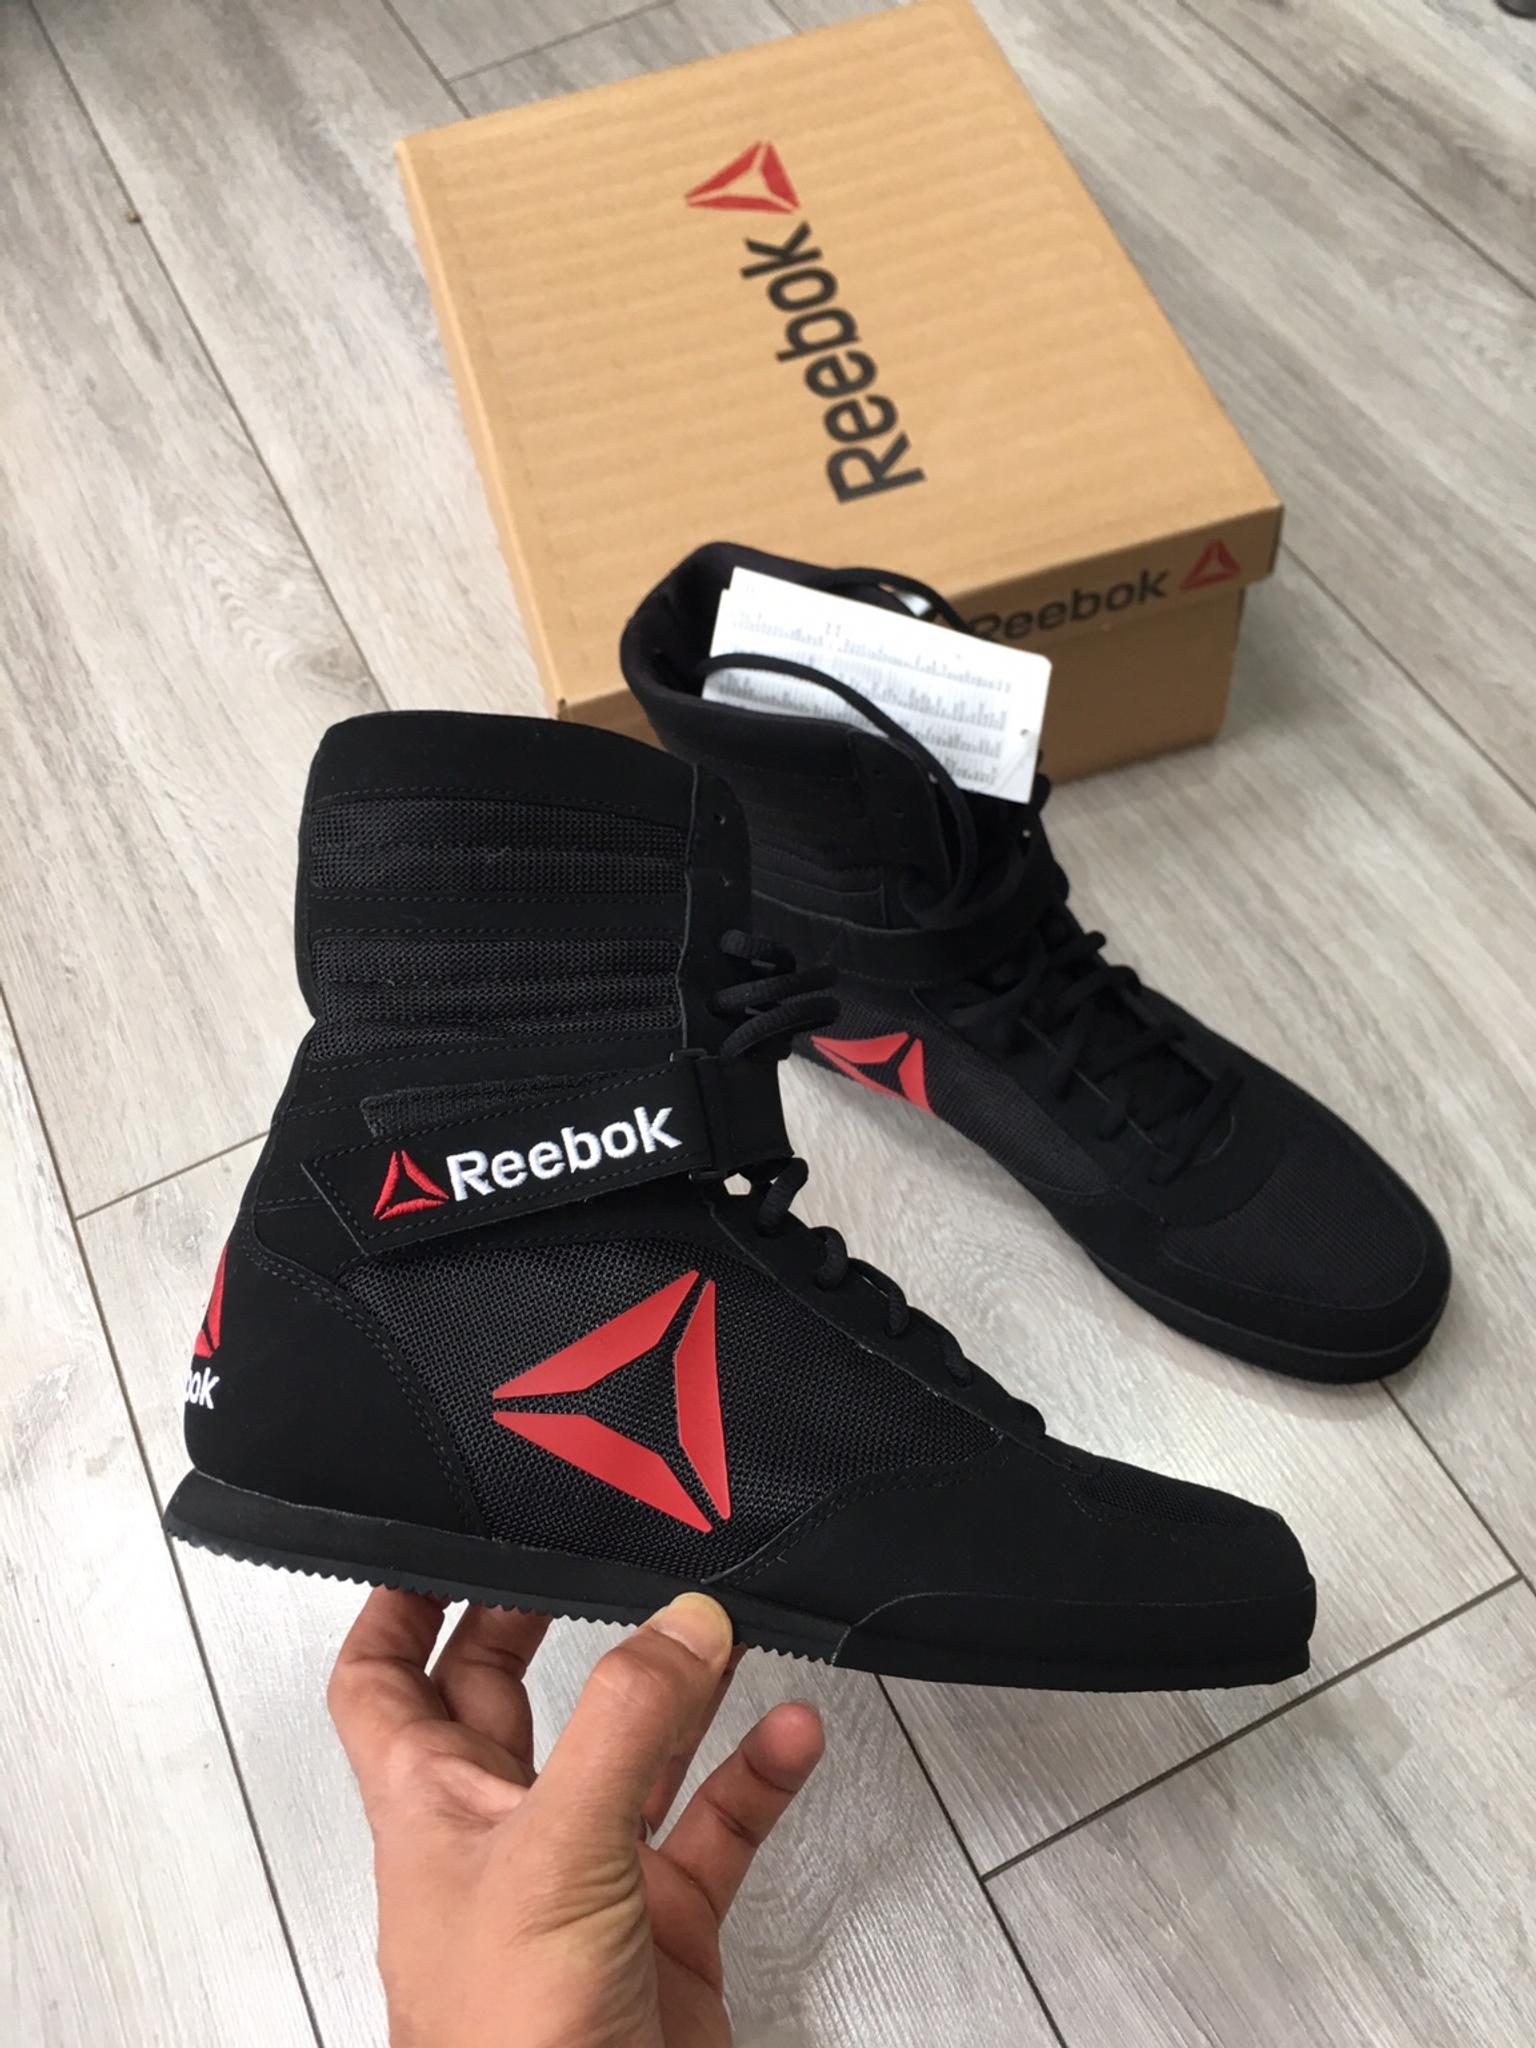 limited edition reebok boxing boots